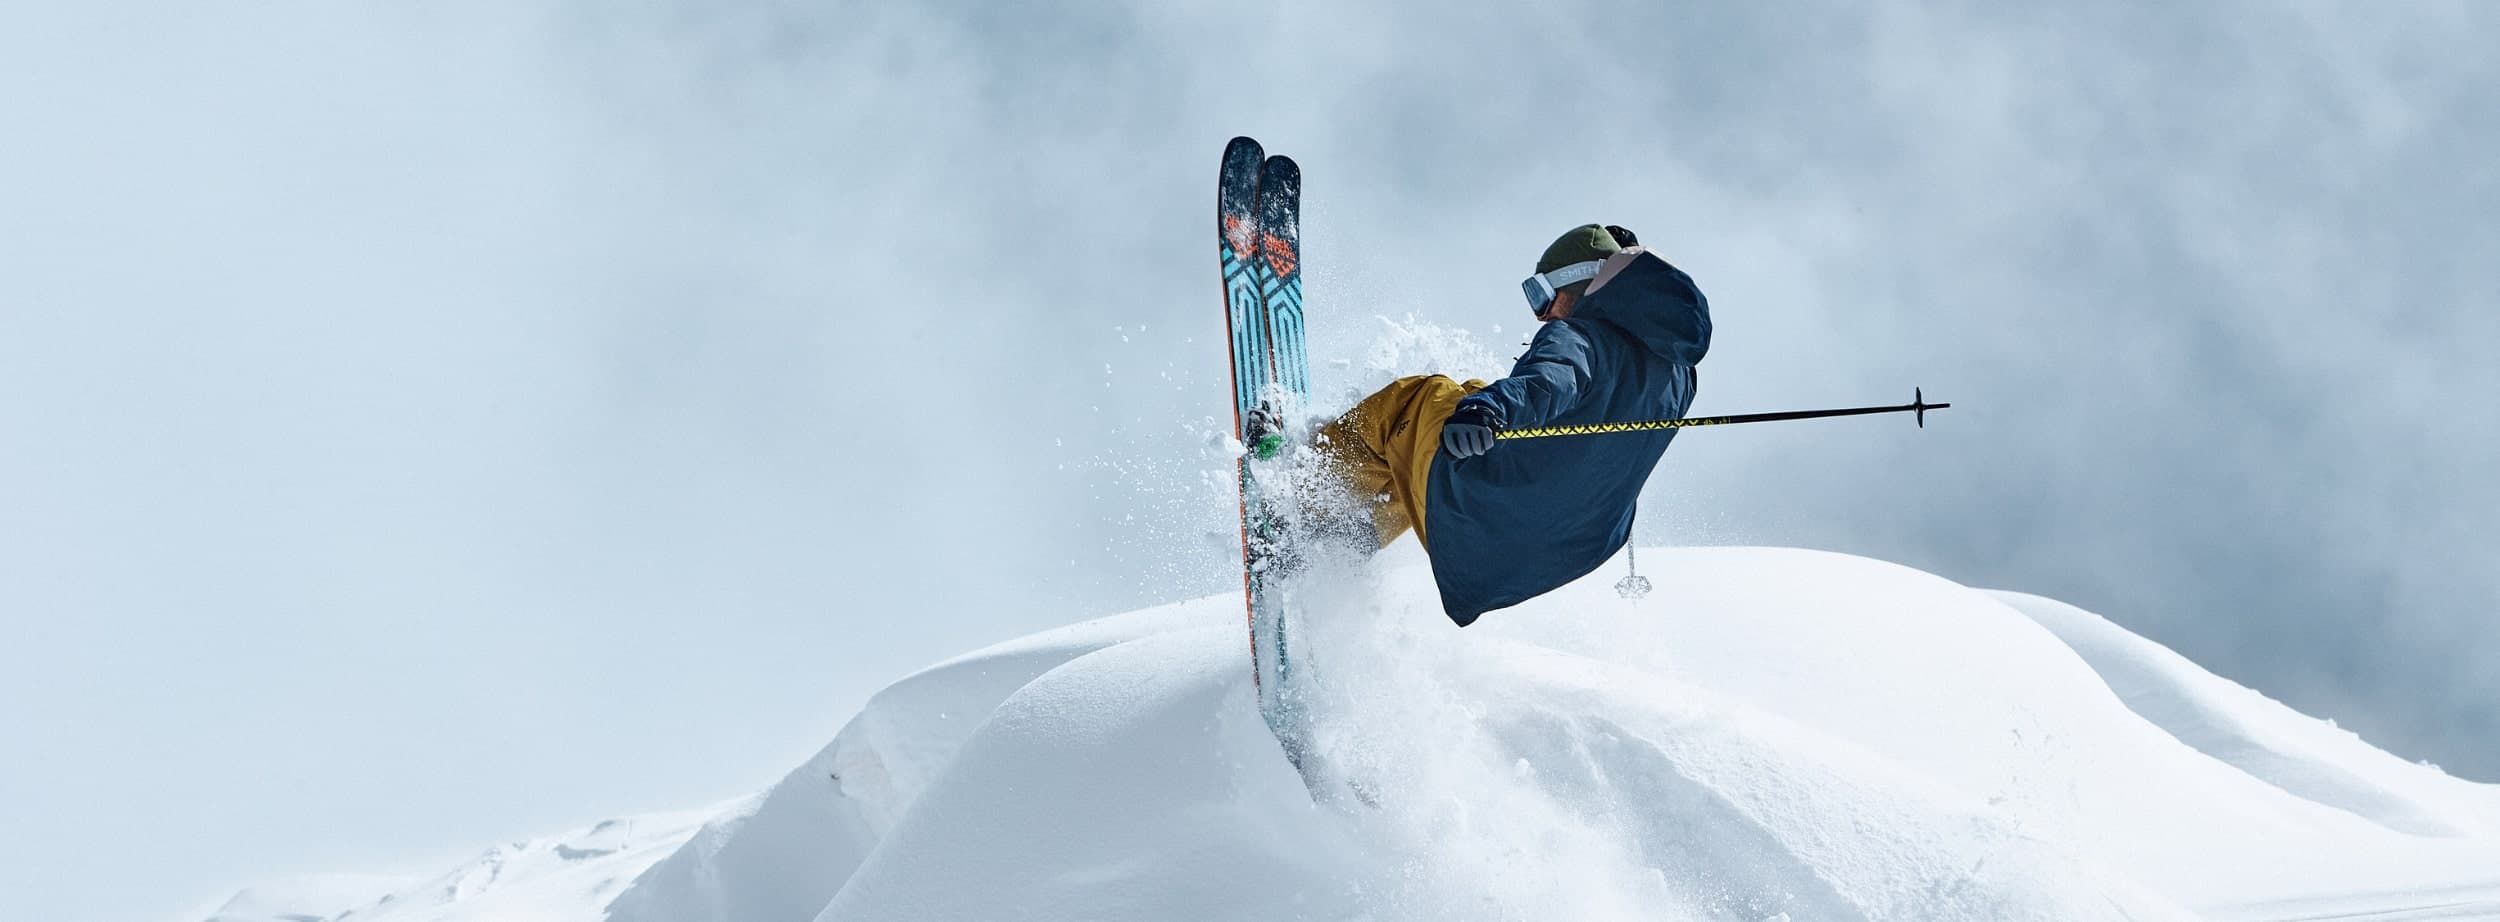 Black Crows Skis • Skis and Outerwear | blackcrows